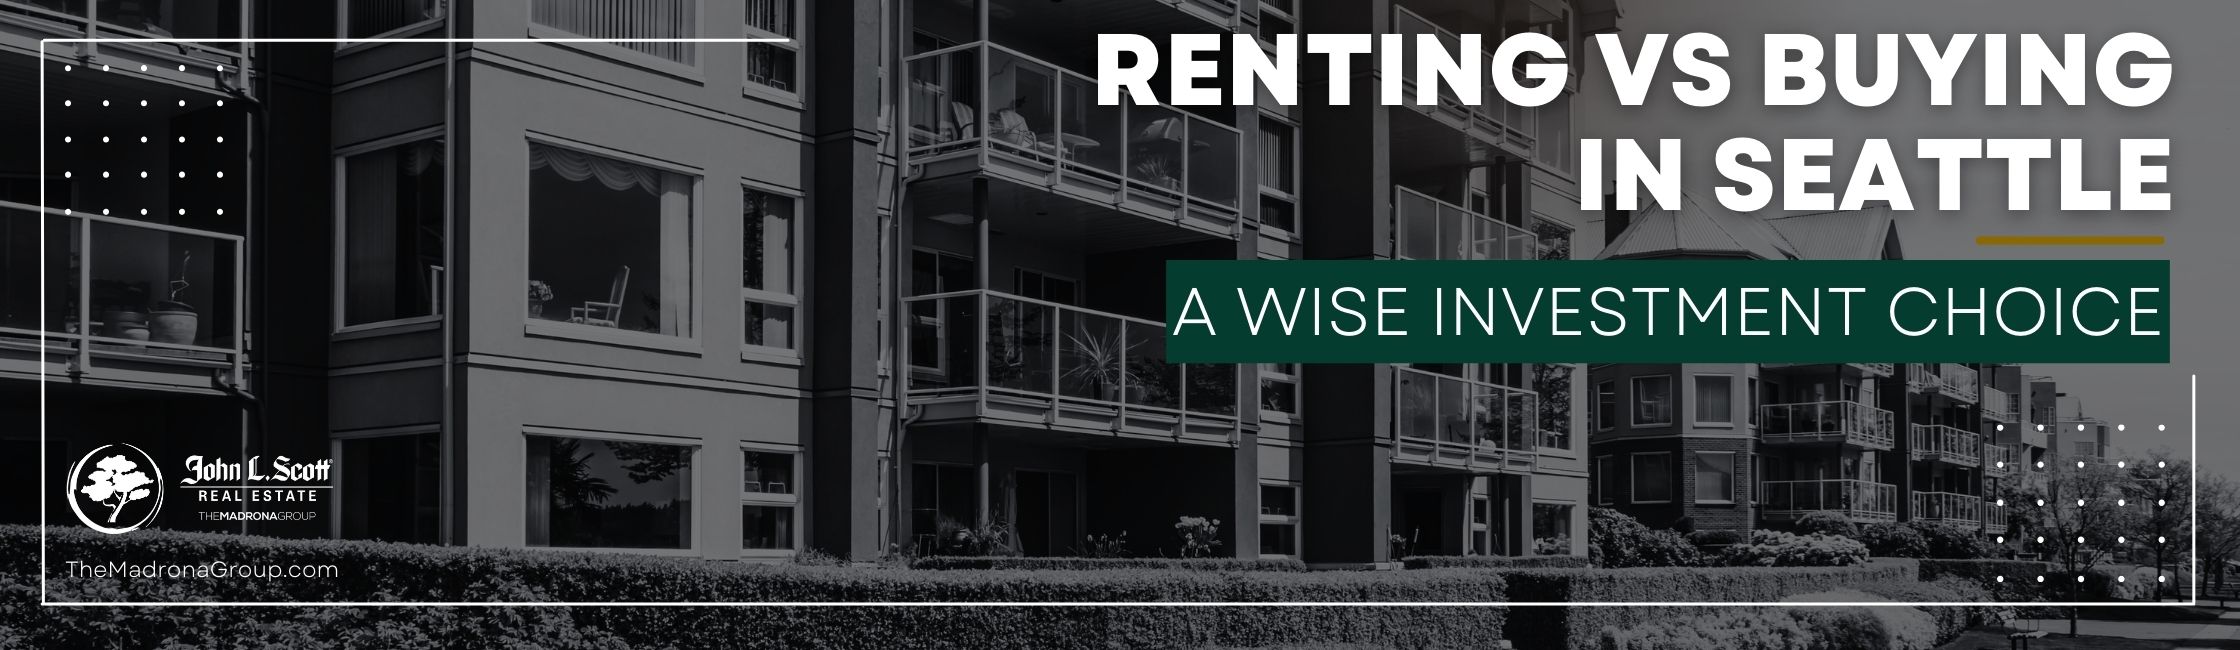 Renting vs Buying in Seattle: A Wise Investment Choice